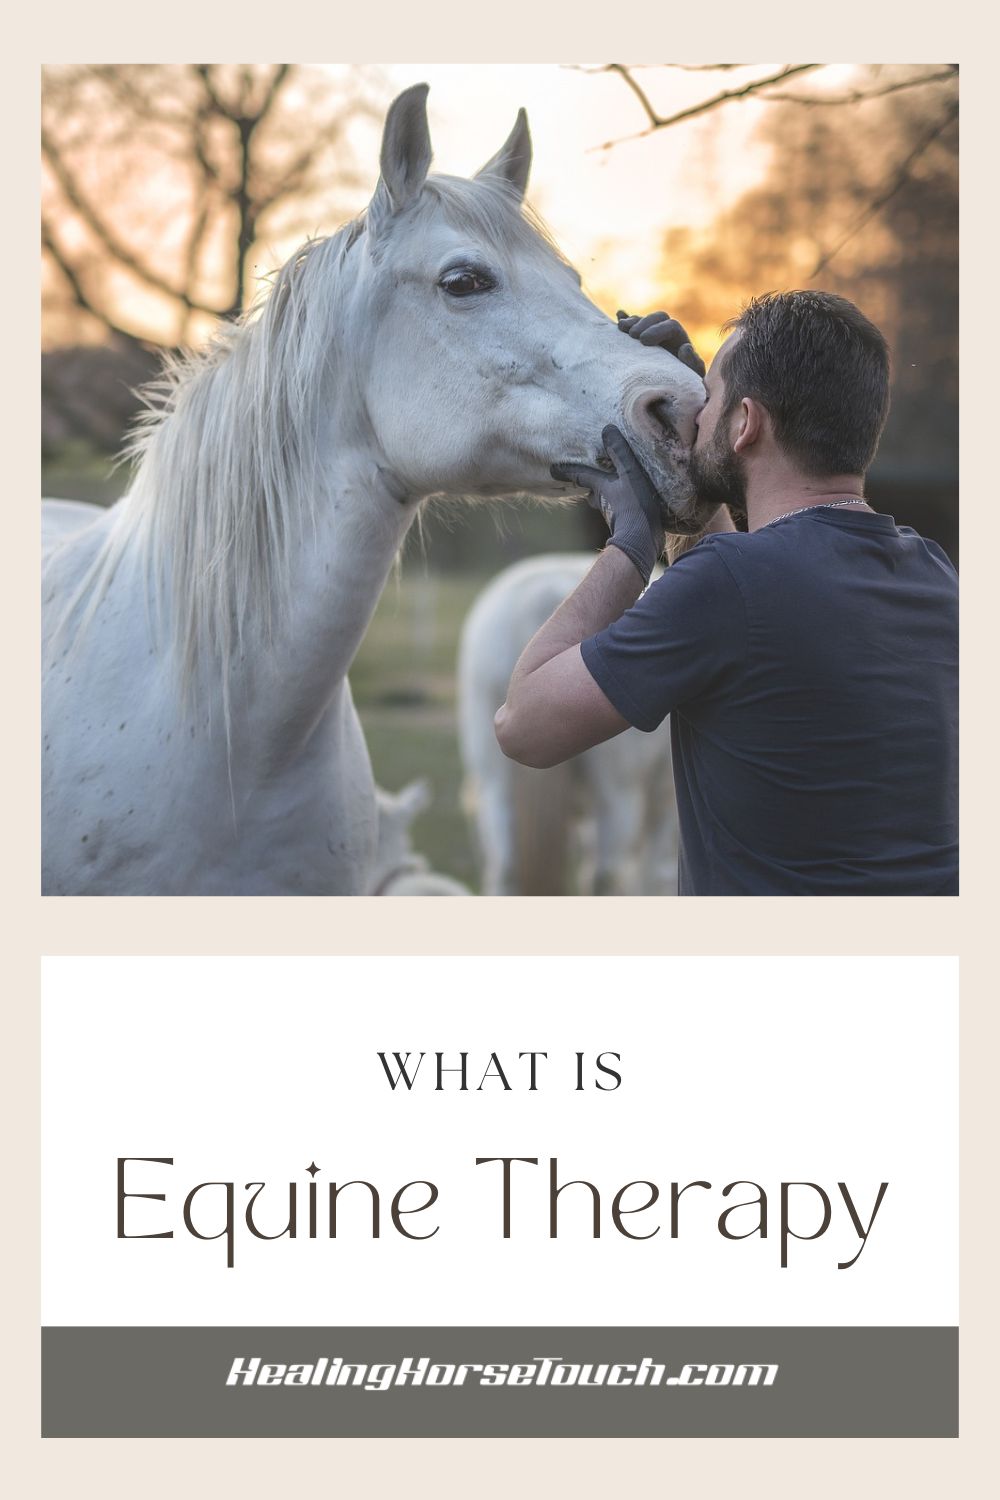 What is Equine Therapy